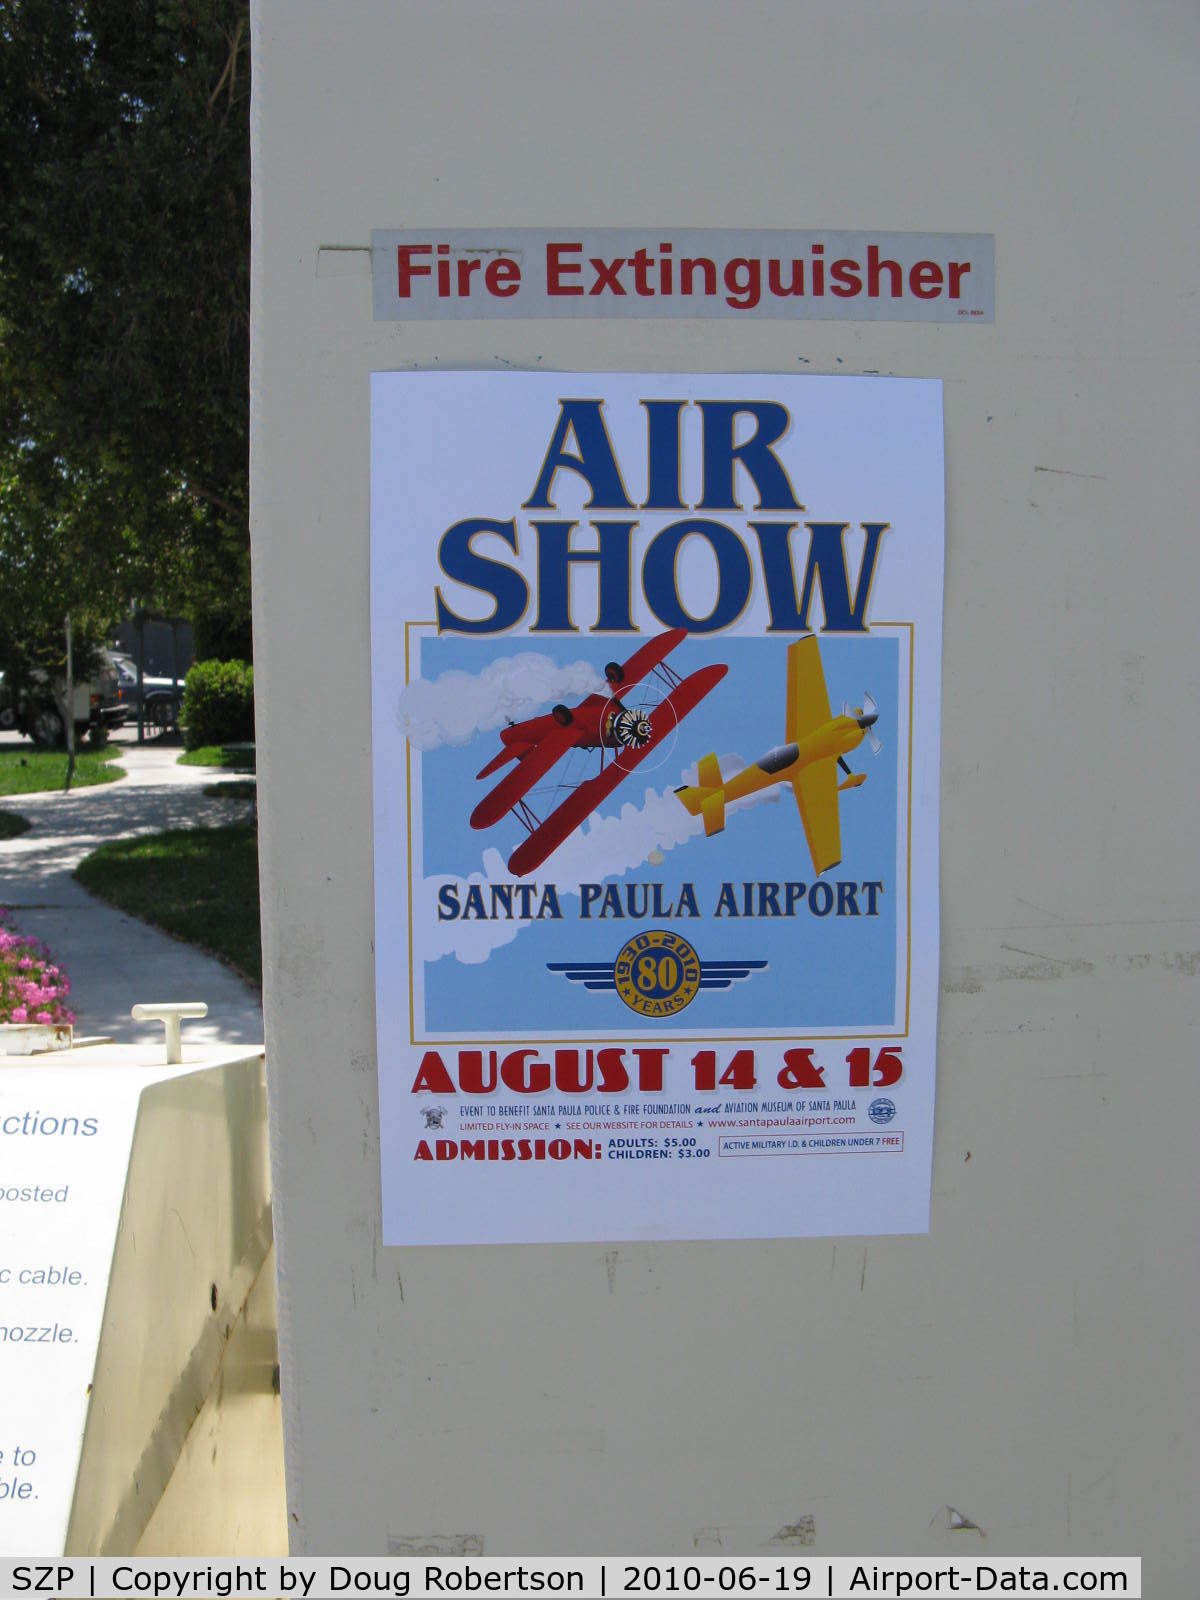 Santa Paula Airport (SZP) - August 2010 is the 80th Anniversary of the Airport. Air Show 14-15 August. See our website: www.santapaulaairport.com   Limited transient parking.